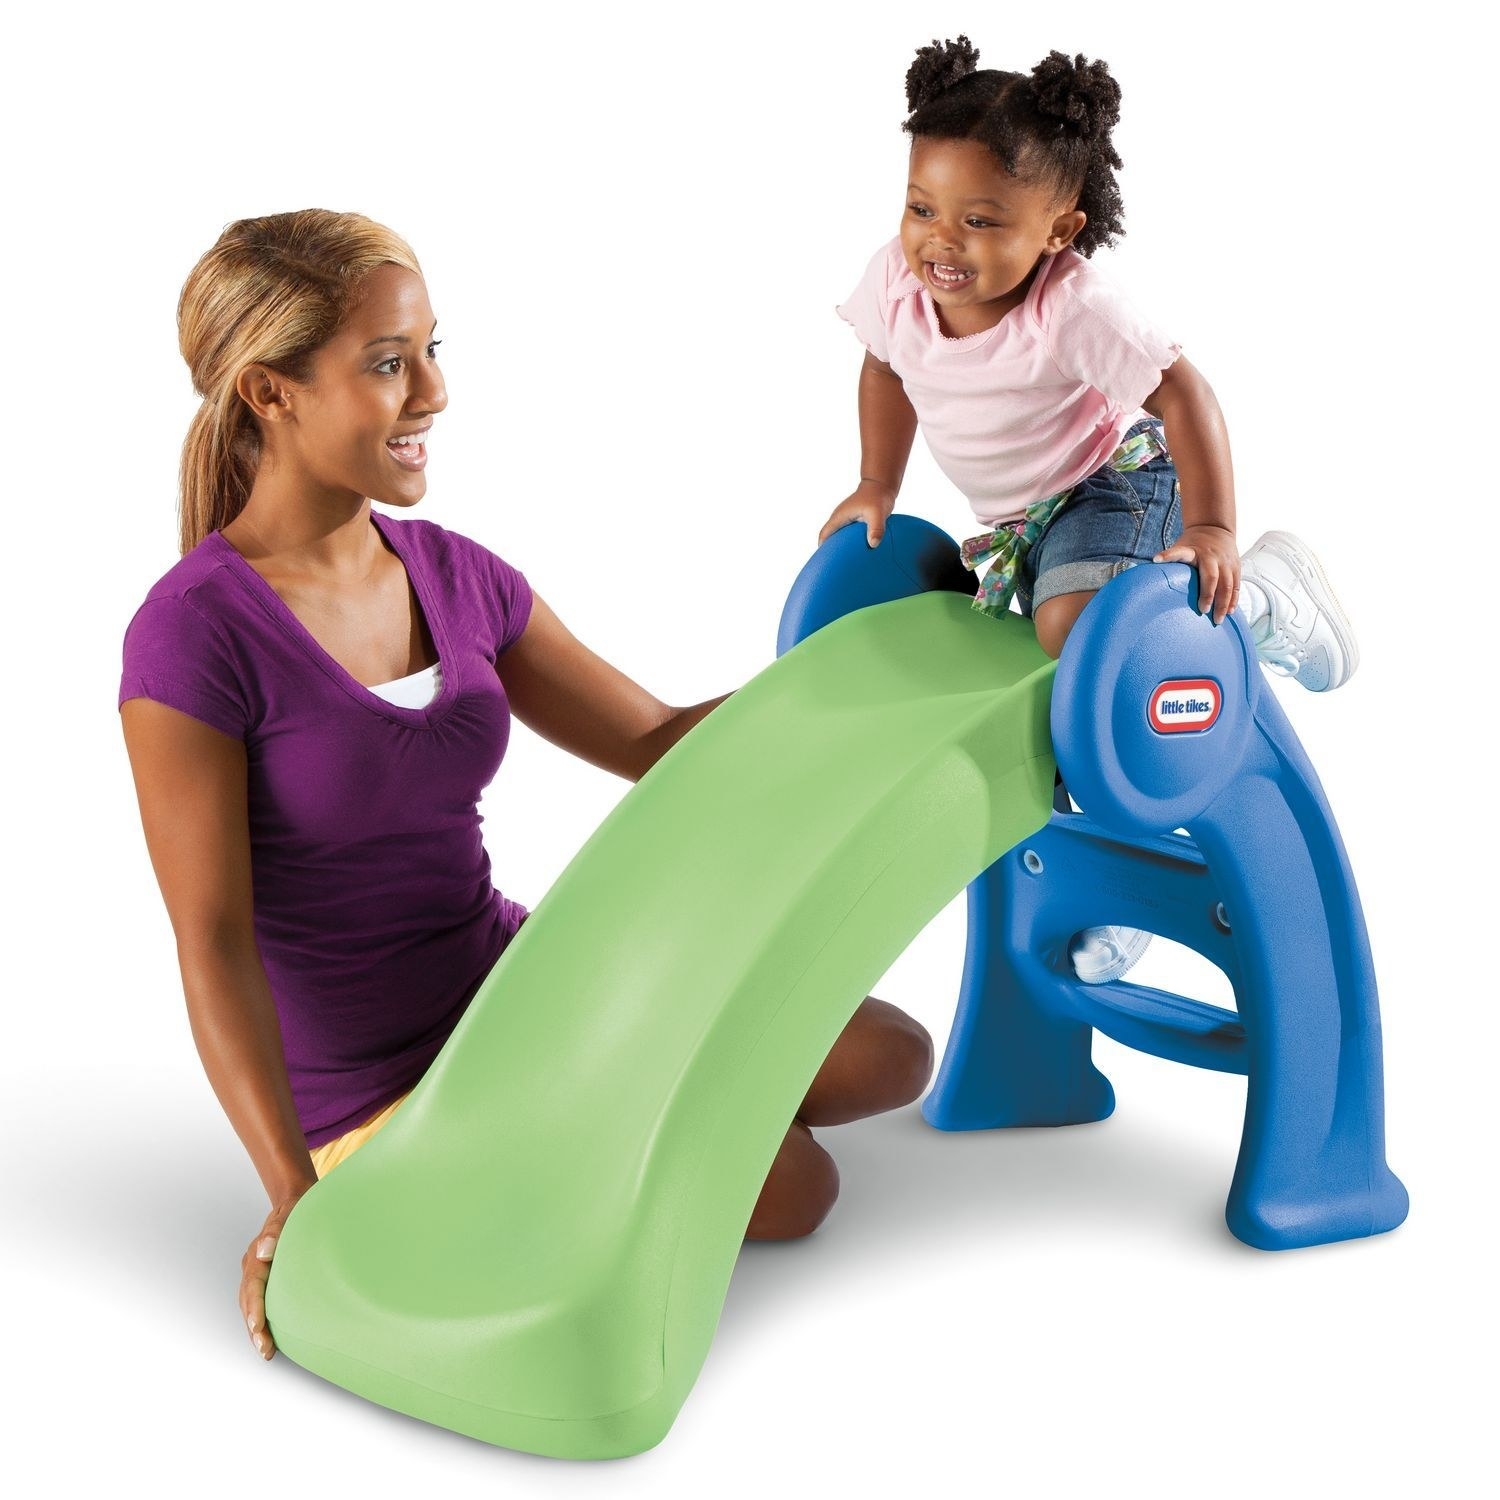 toddler playing on blue and green slide